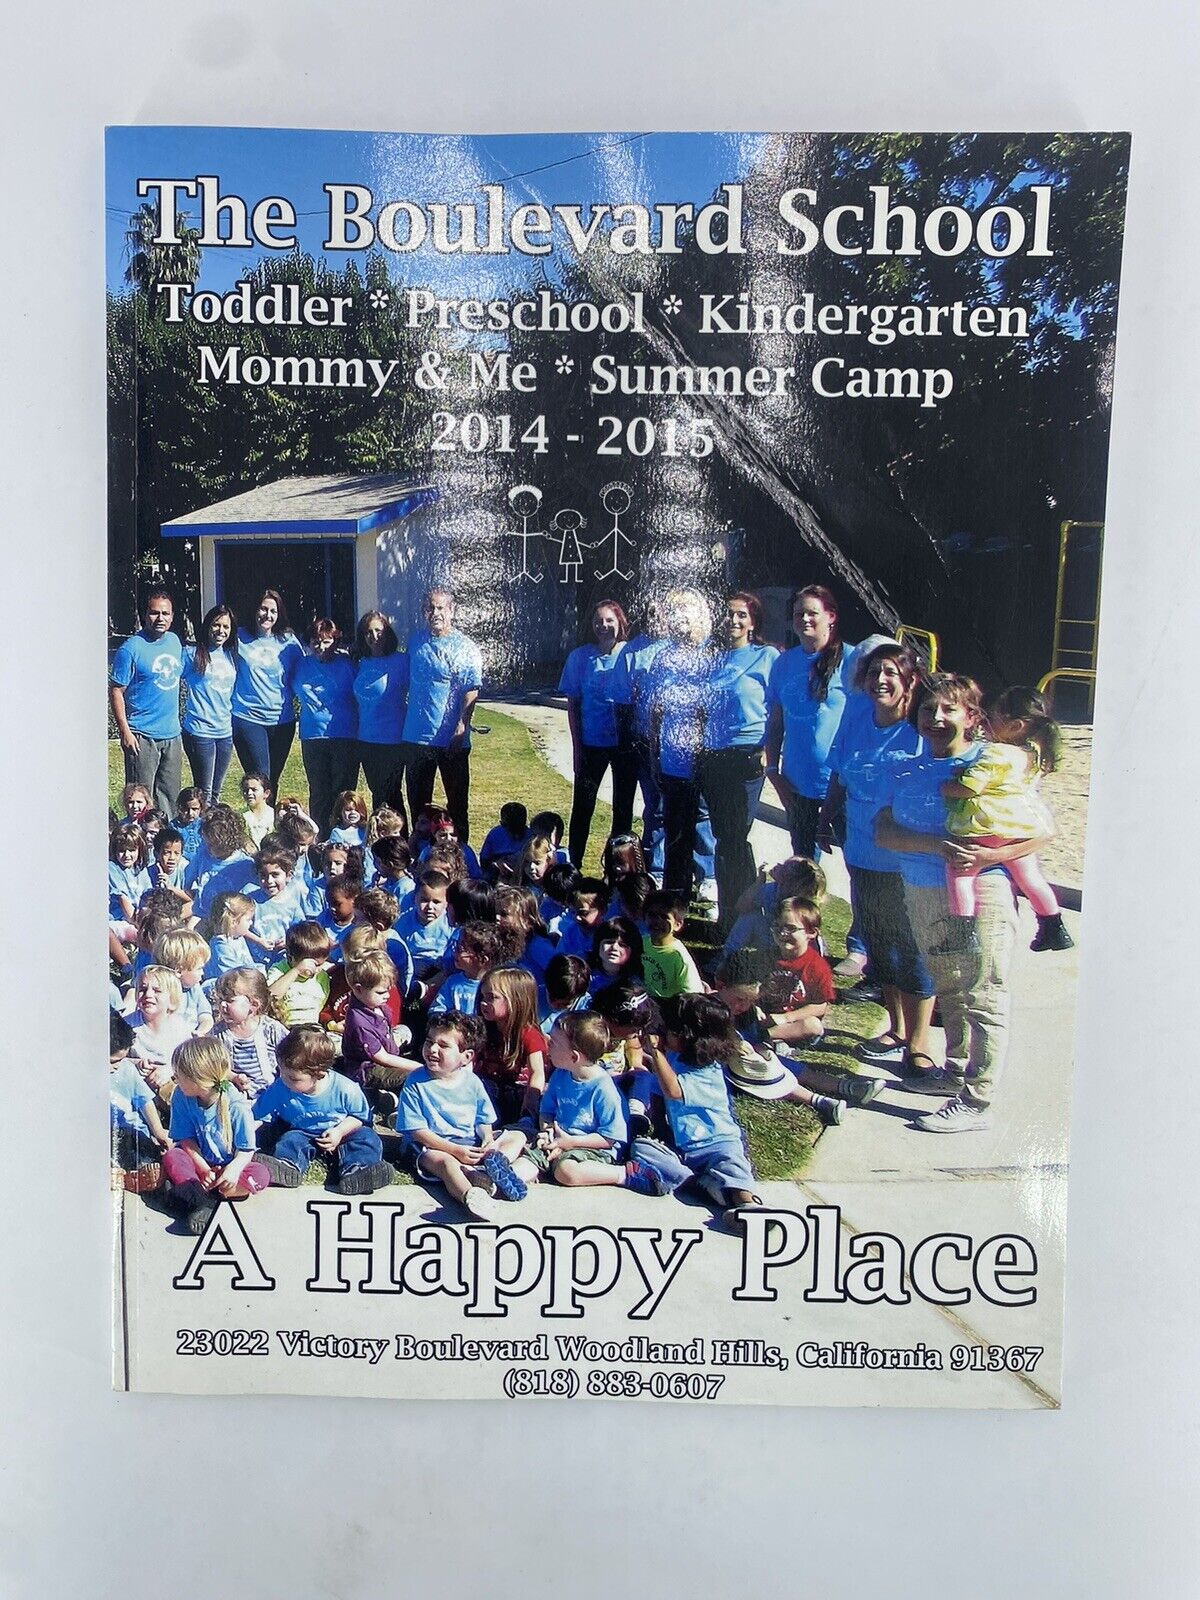 The Boulevard School • “A Happy Place” 2014-2015 Yearbook • Woodland Hills, CA